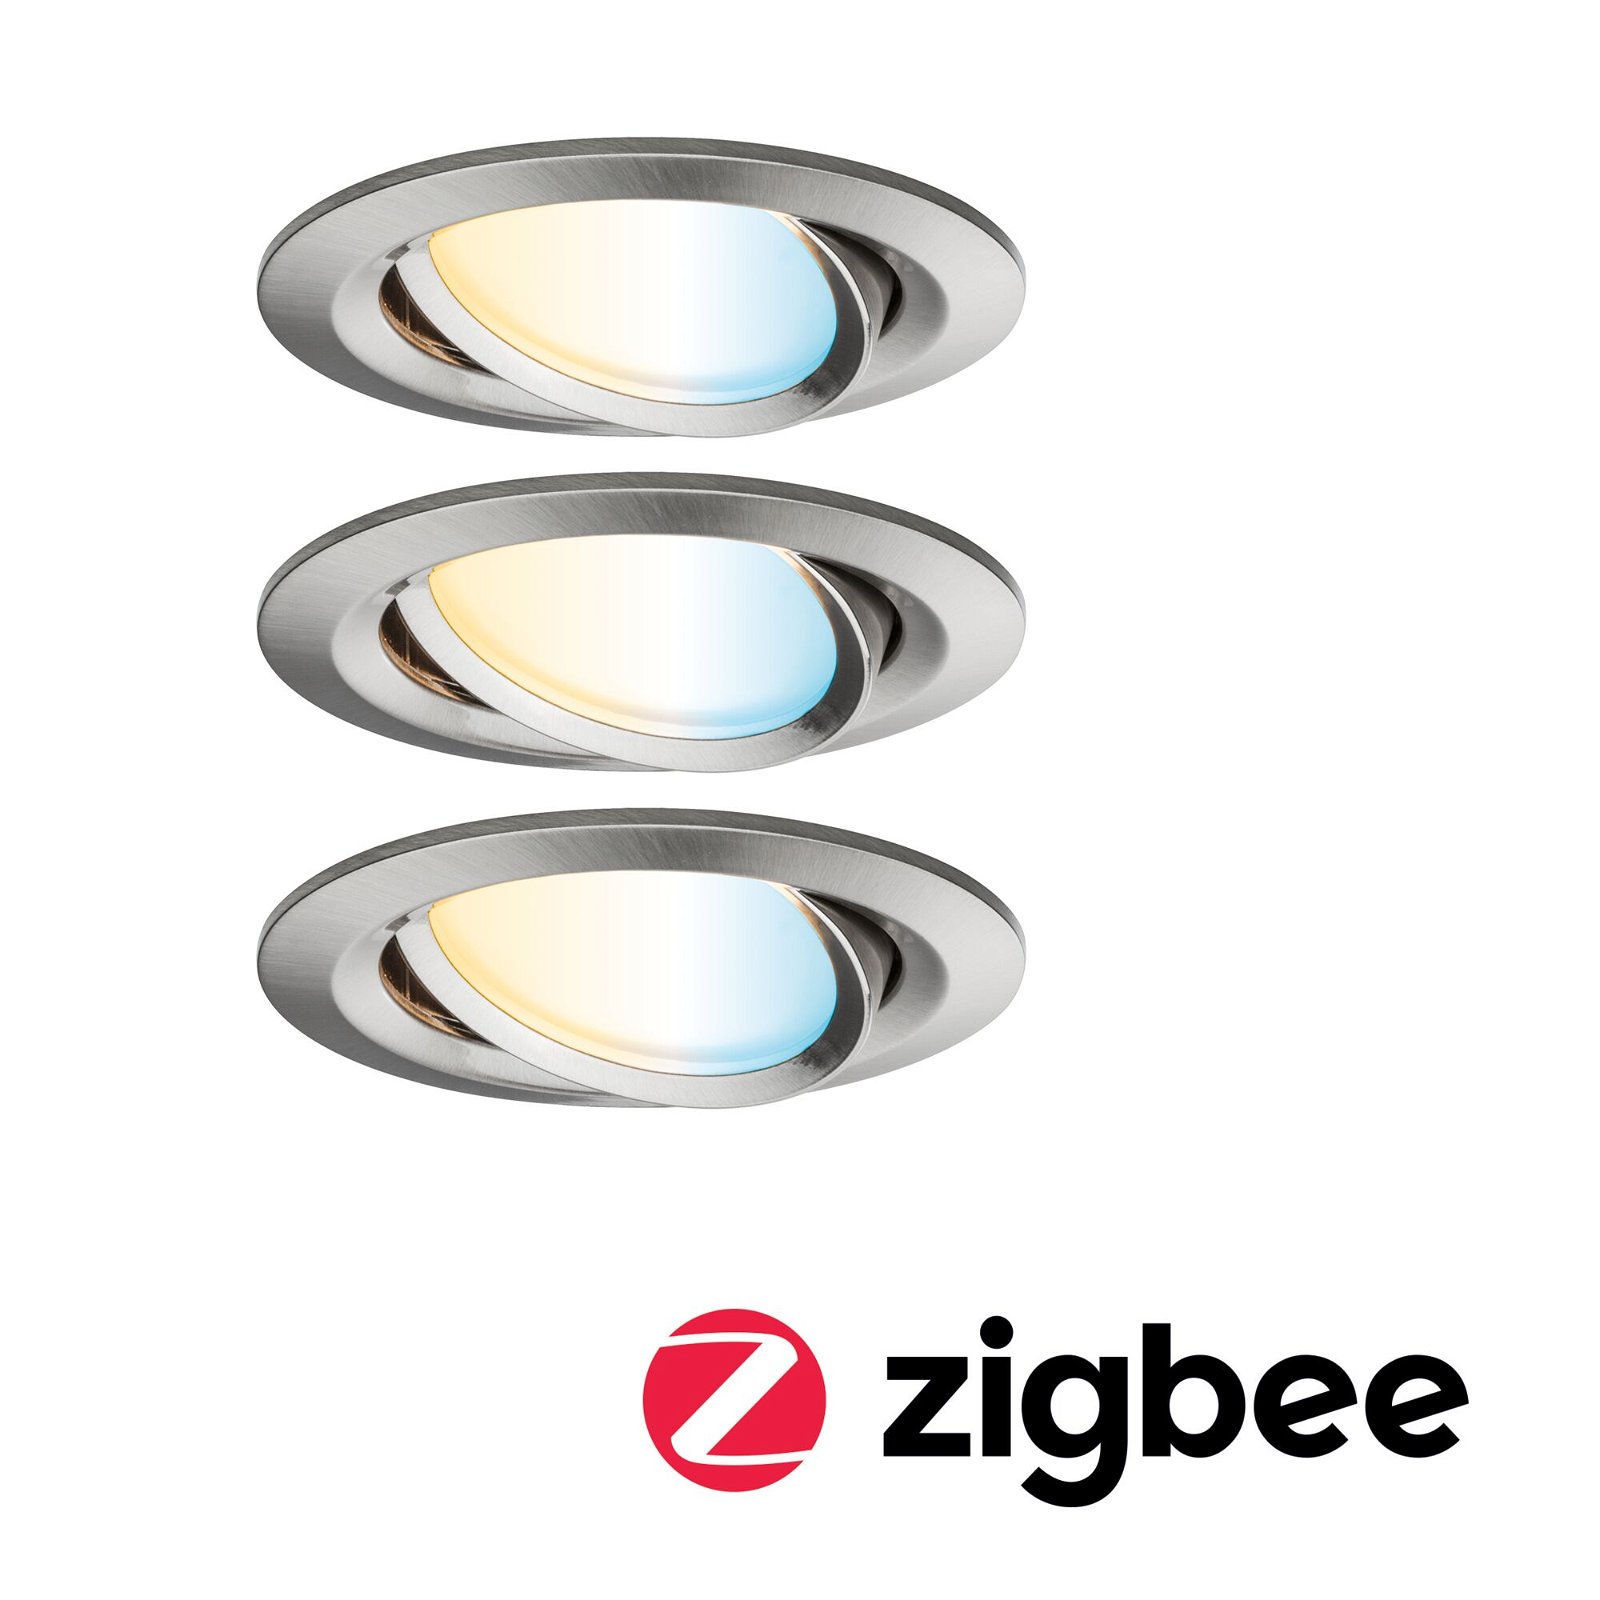 LED Recessed luminaire Smart Home Zigbee Nova Plus Coin Basic Set Swivelling round 84mm 50° Coin 3x6W 3x470lm 230V dimmable Tunable White Brushed iron